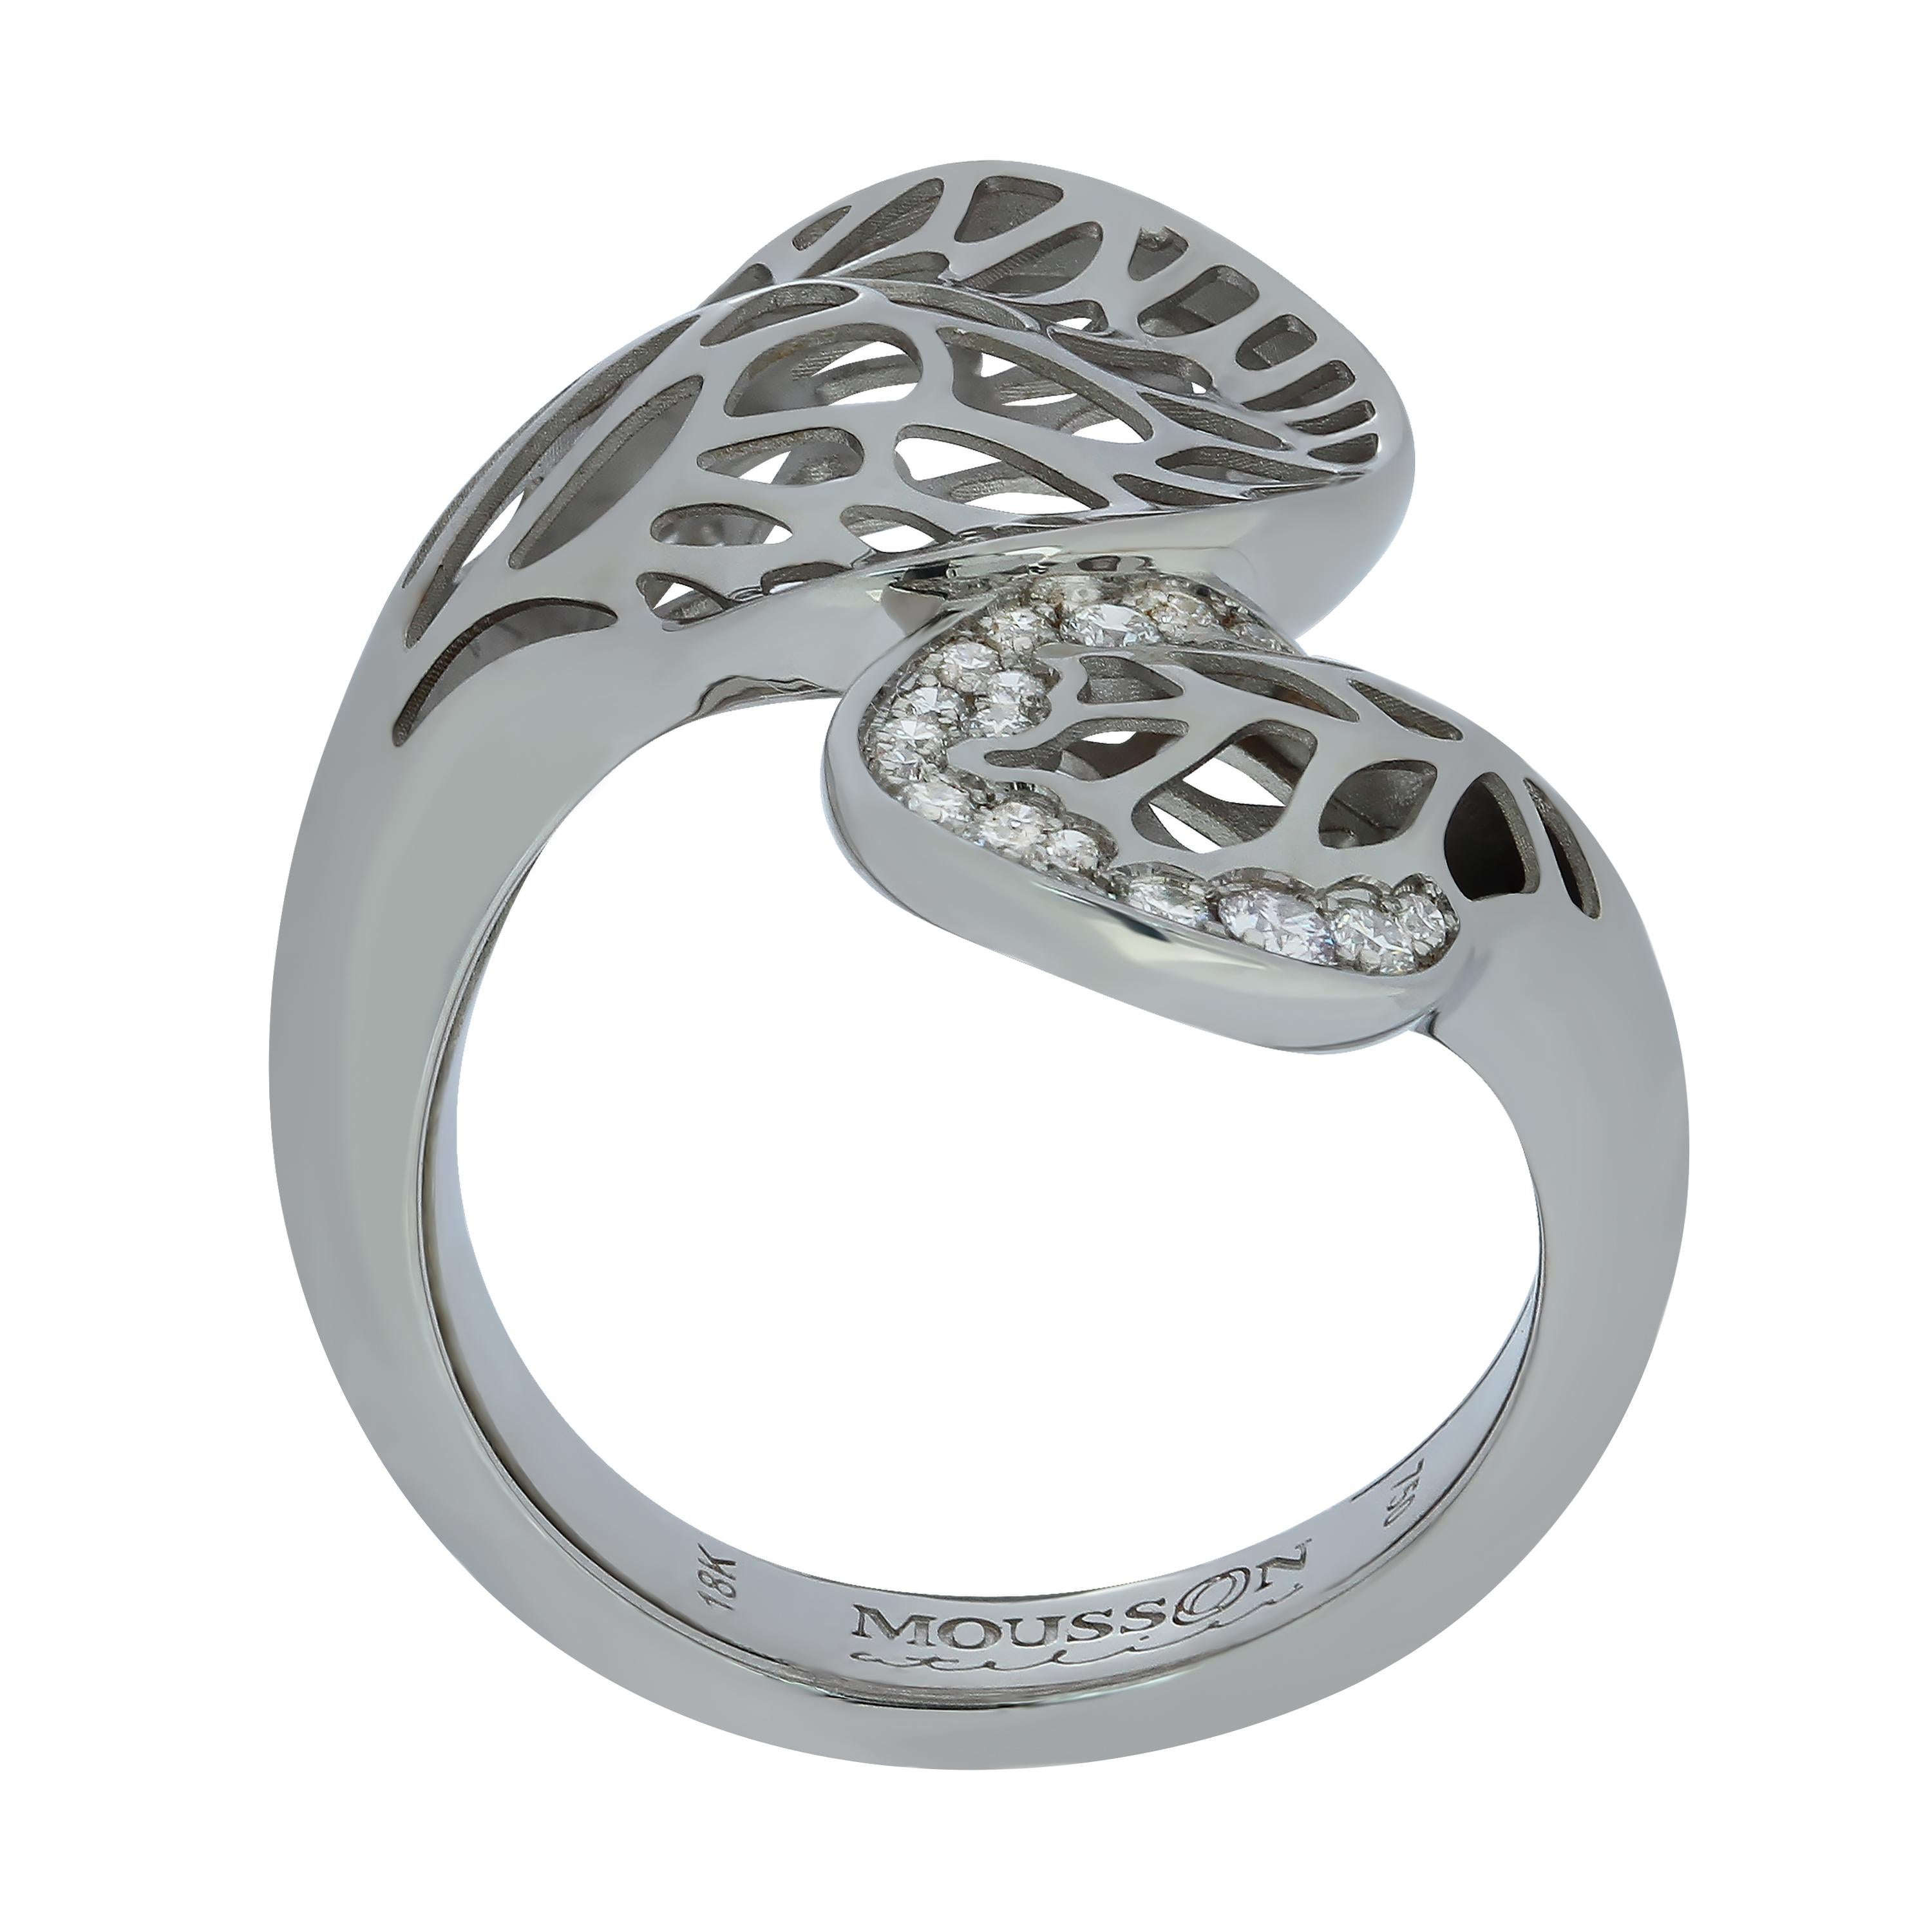 Diamonds 18 Karat White Gold Tree Mushroom Ring
We present to your attention a Ring from our Tresure Forest Collection in the form of a tree mushroom. White 18 Karat Gold Ring has an abnormal deeply cracked shape, which was created, inspired by this